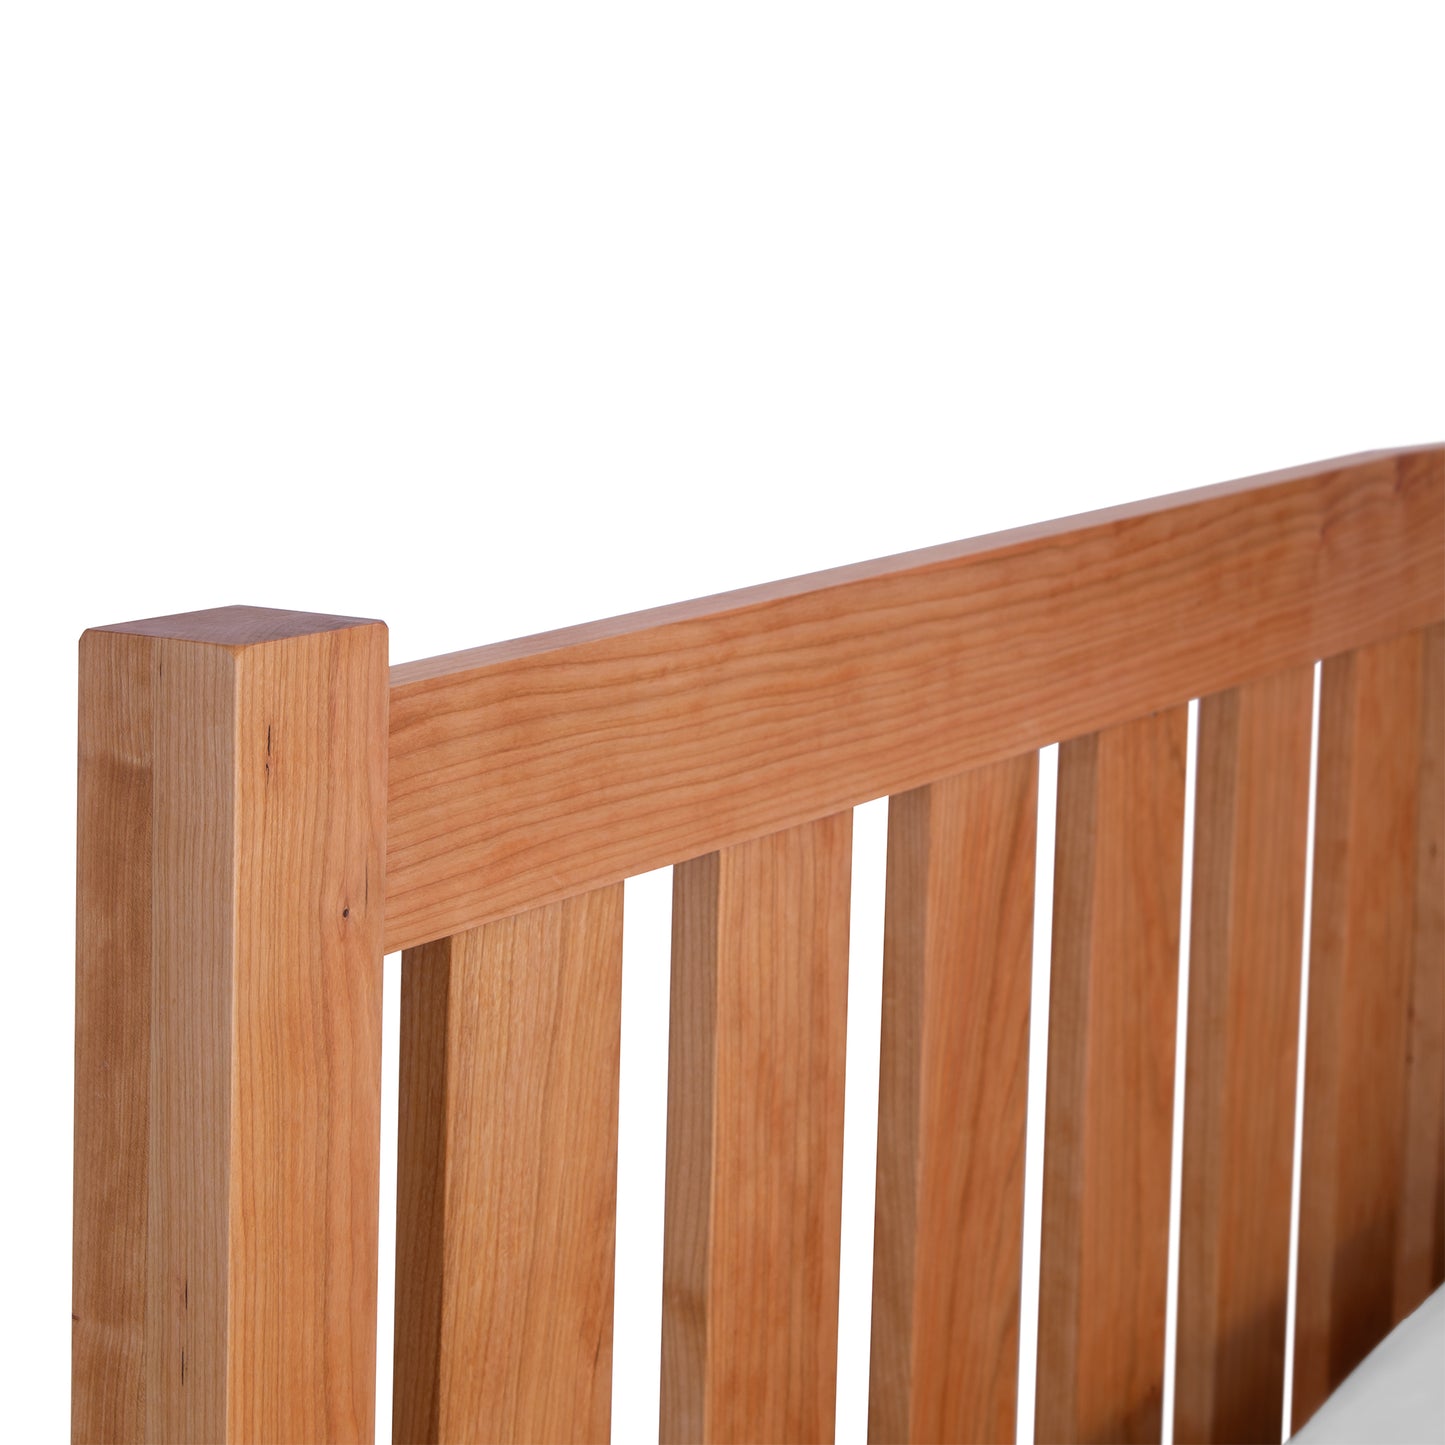 Close-up of a Bennington Bed with High Footboard from Vermont Furniture Designs, made of walnut wood slatted headboard with a clean, simple design on a white background.